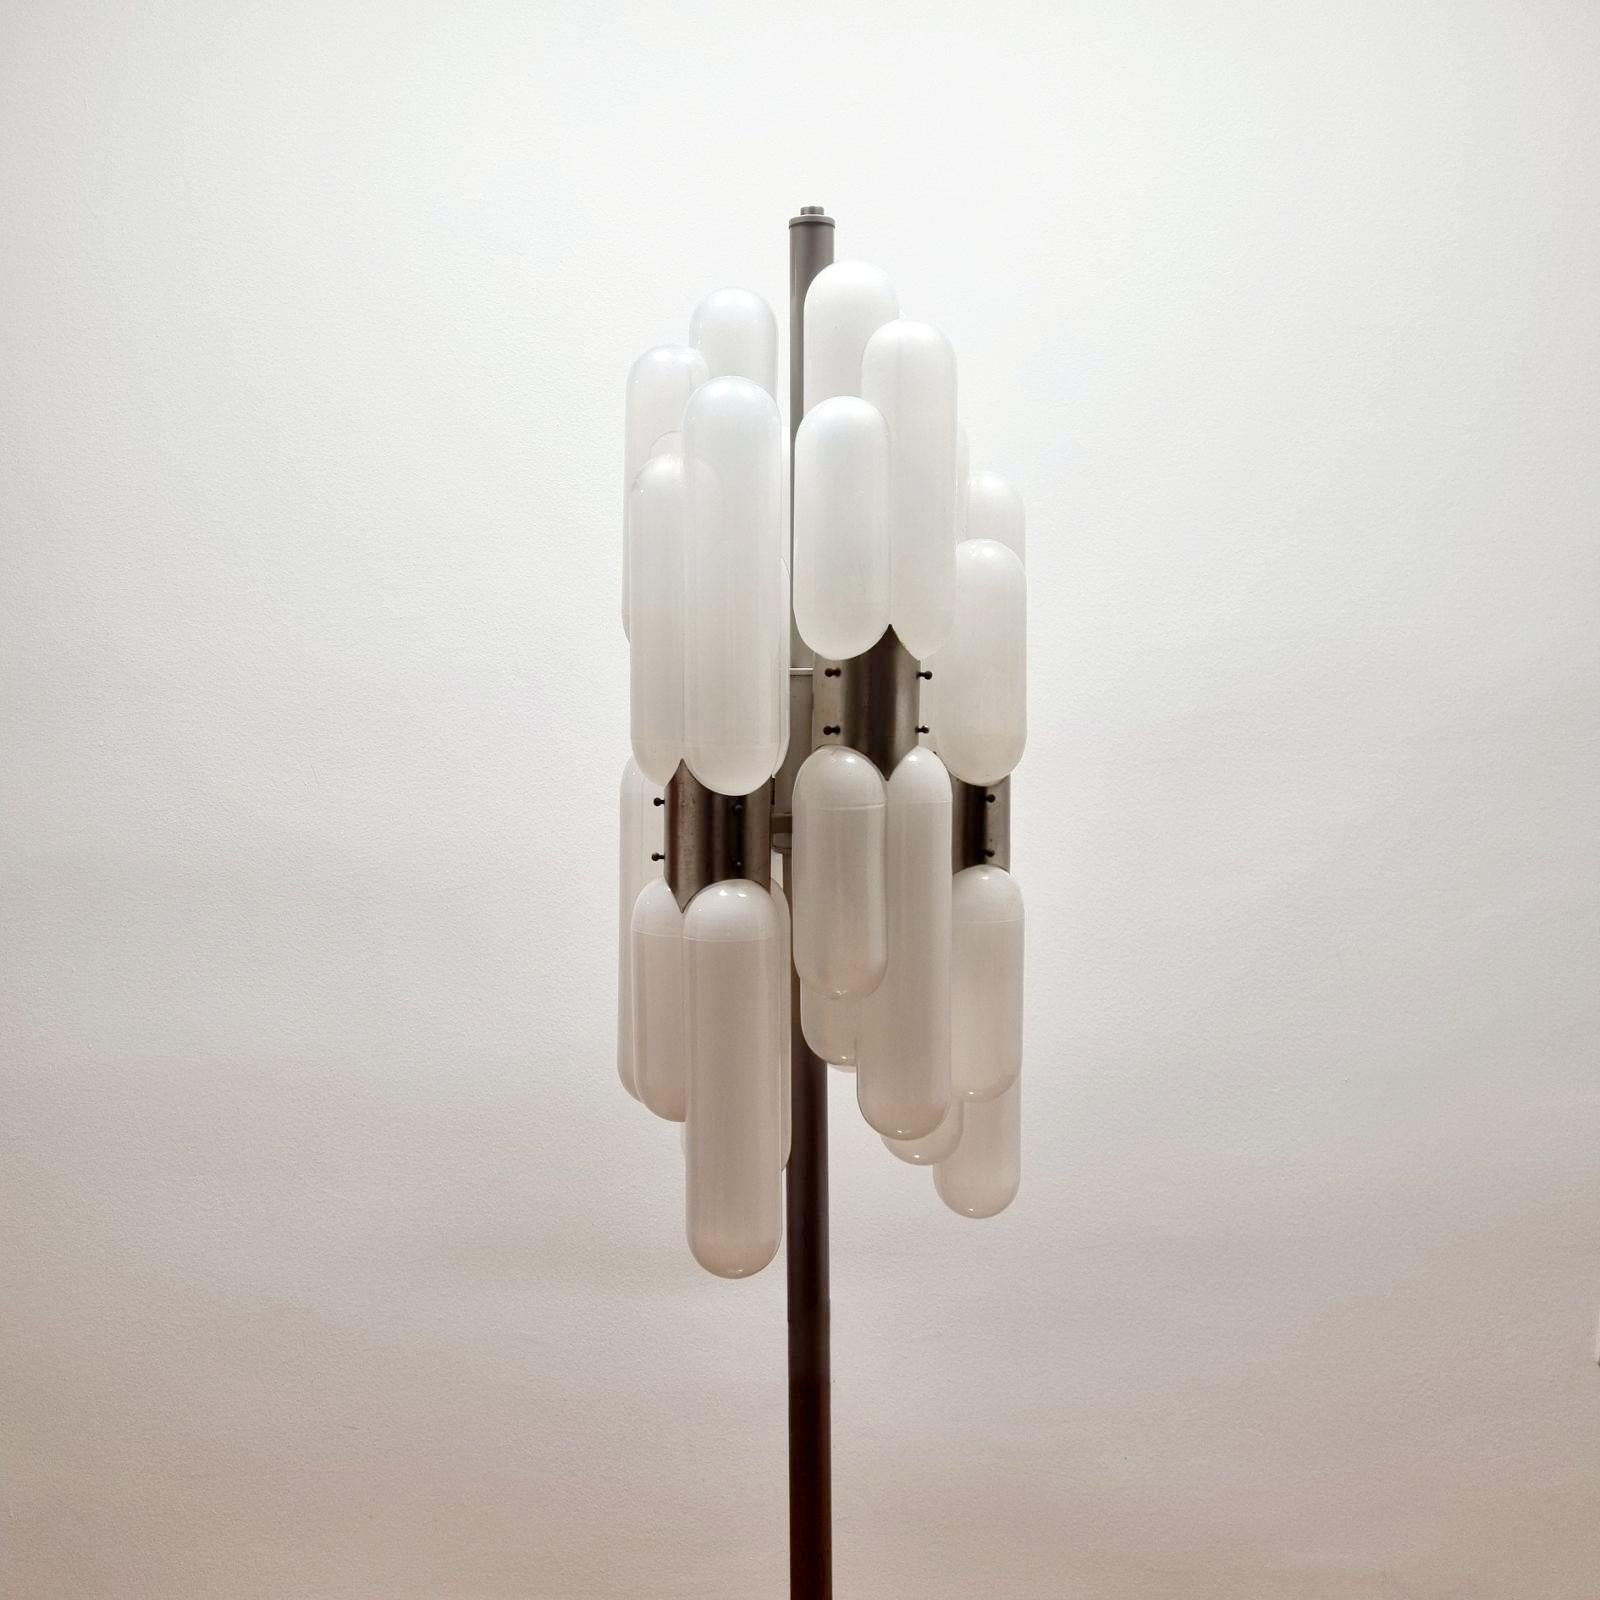 Rare floor lamp designed by Carlo Nason for Mazzega
made from metal and Murano glass
